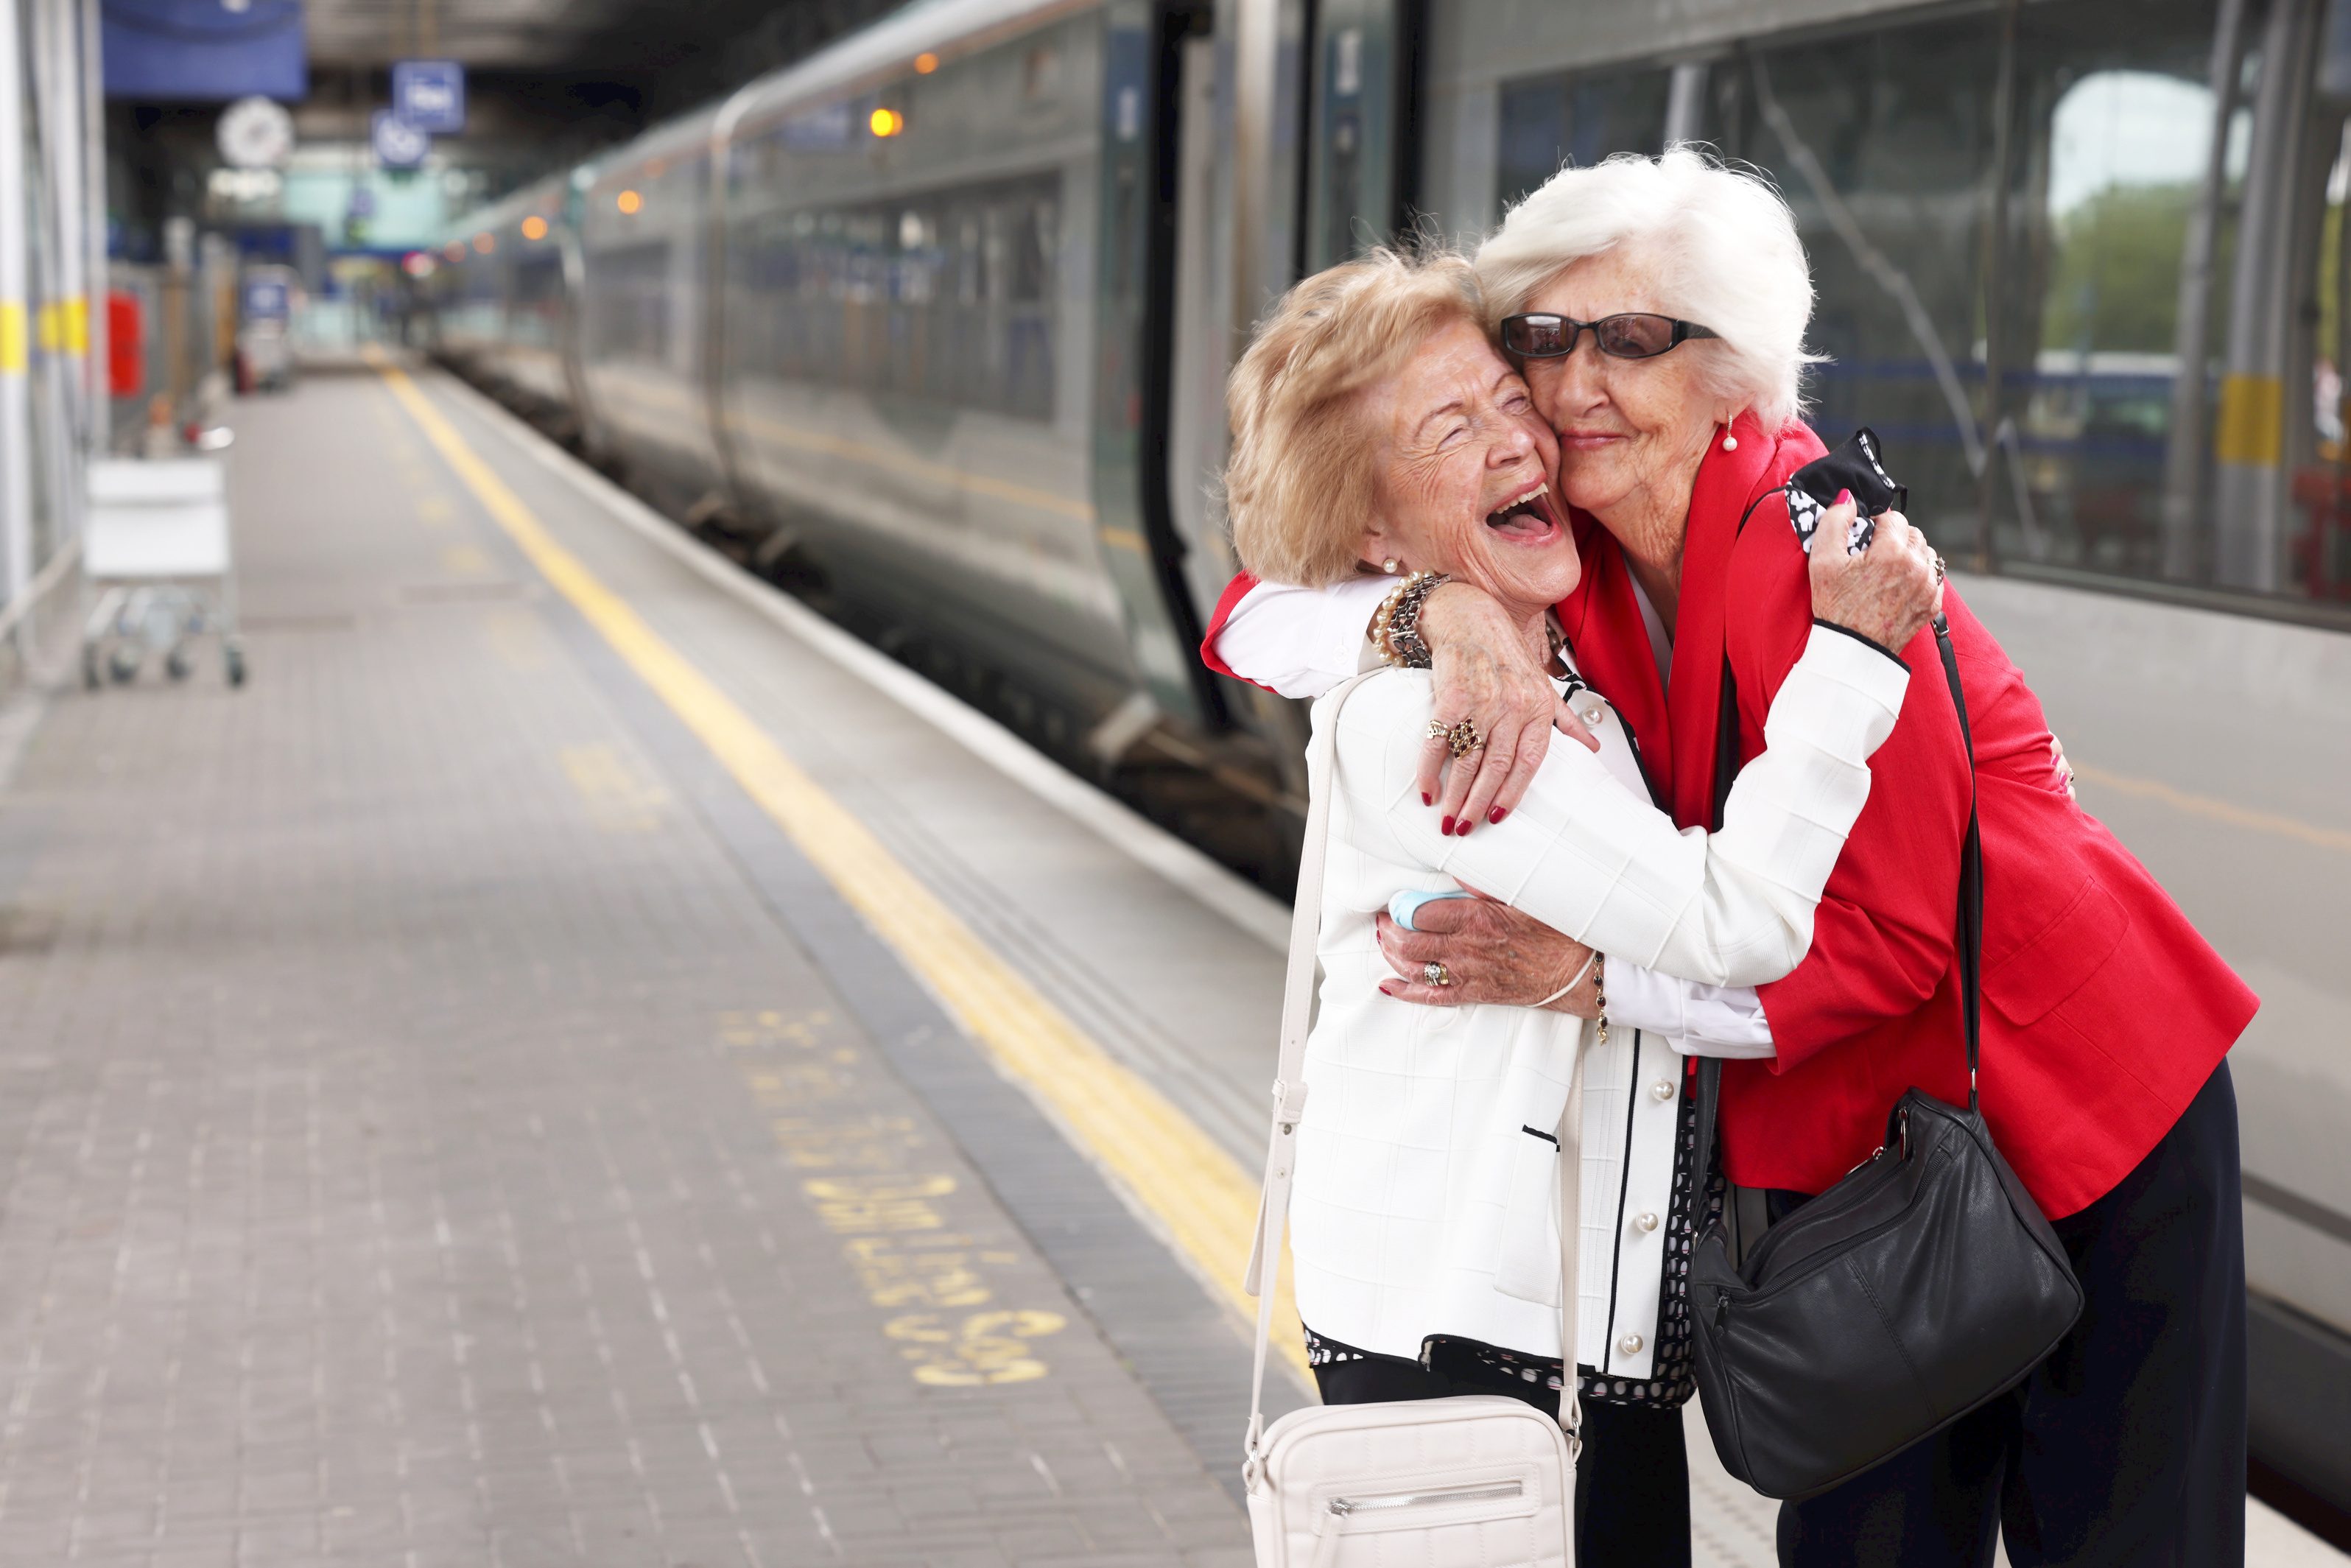 Two female customers hugging before they board the train